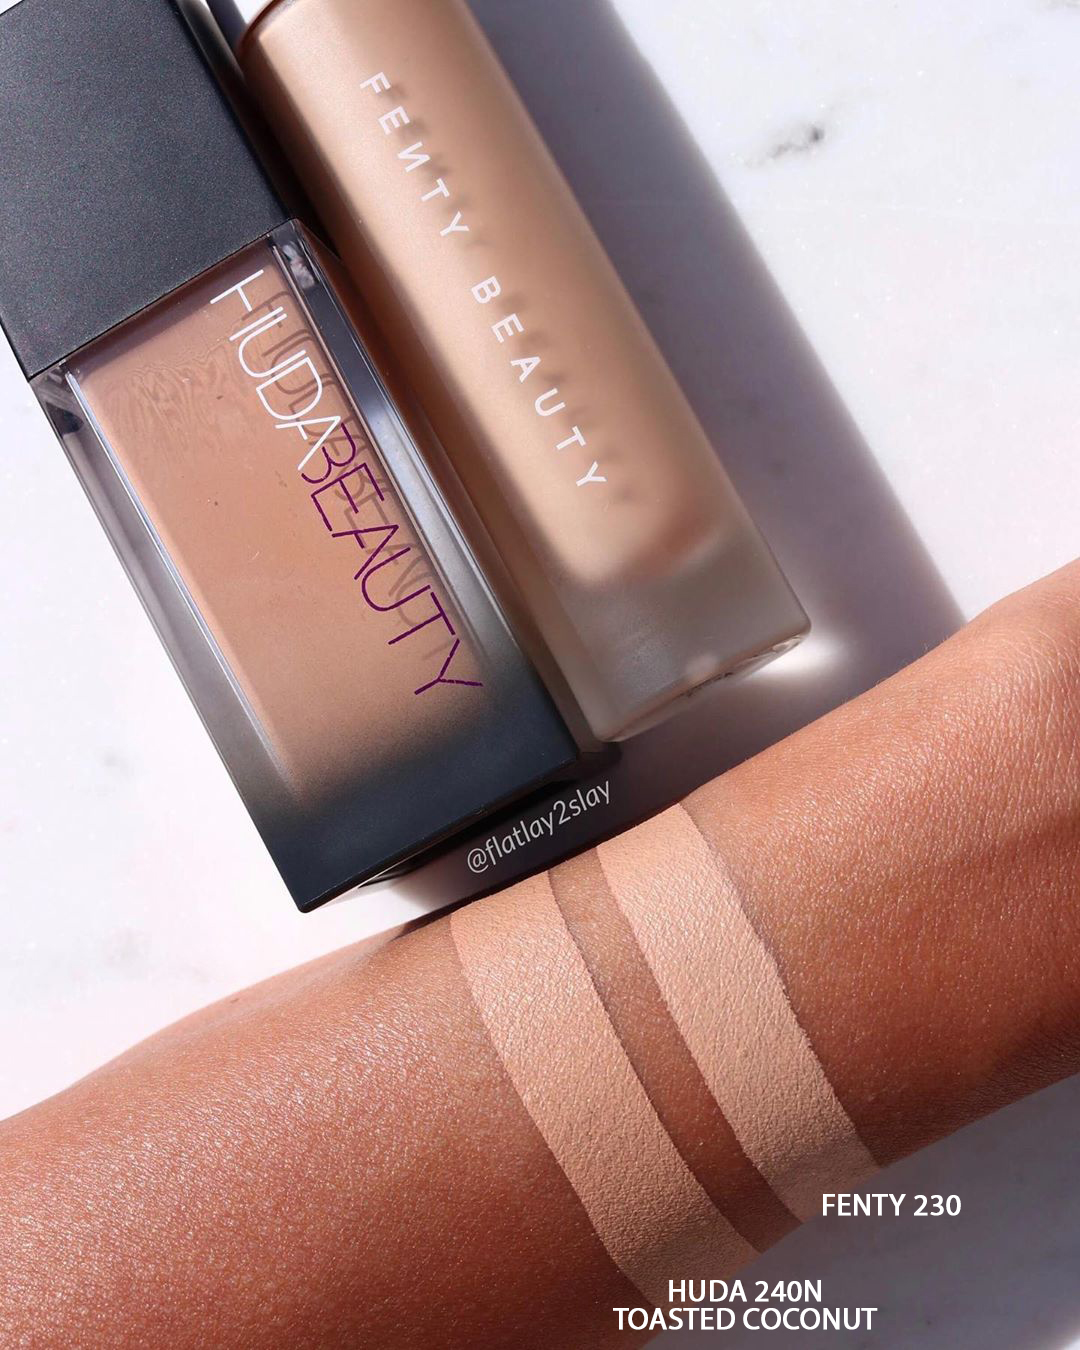 Fenty beauty pro filter foundations 230 and 240 review, swatch and